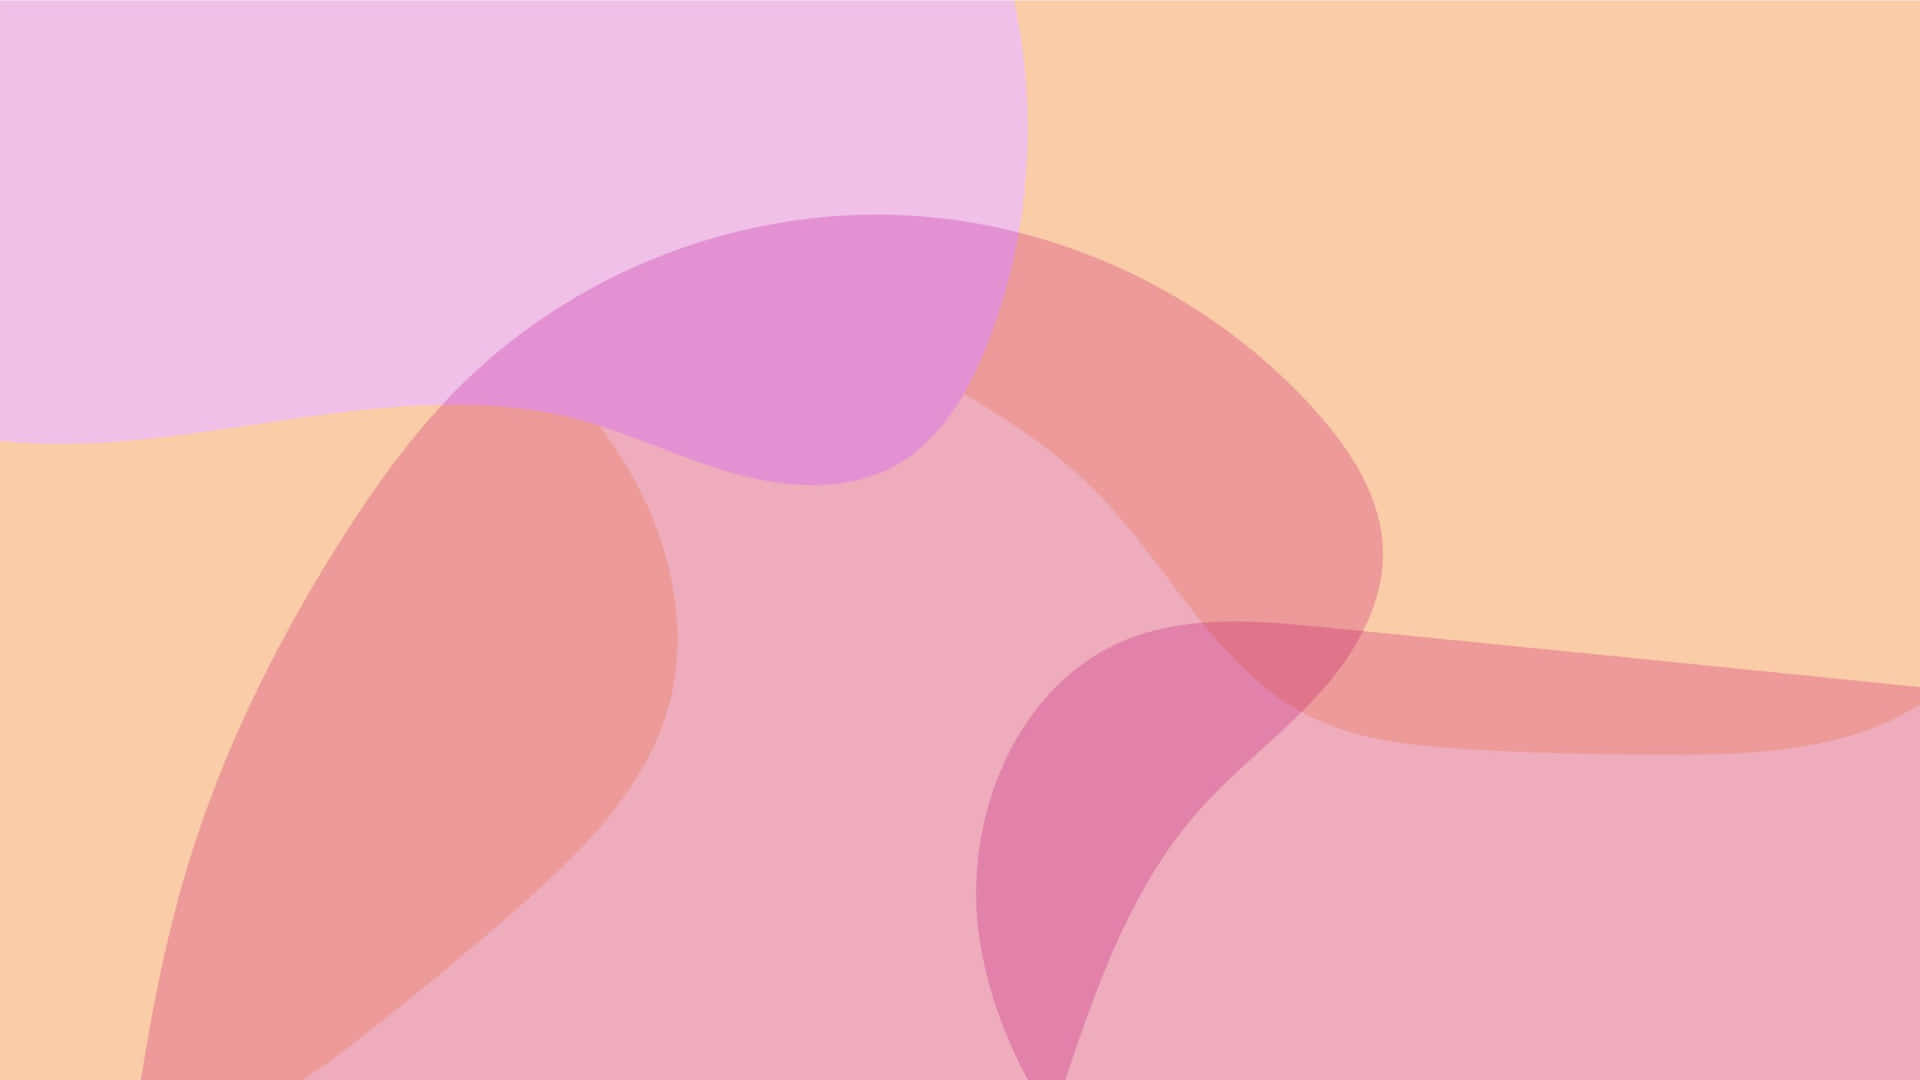 A pink and purple abstract design - Danish